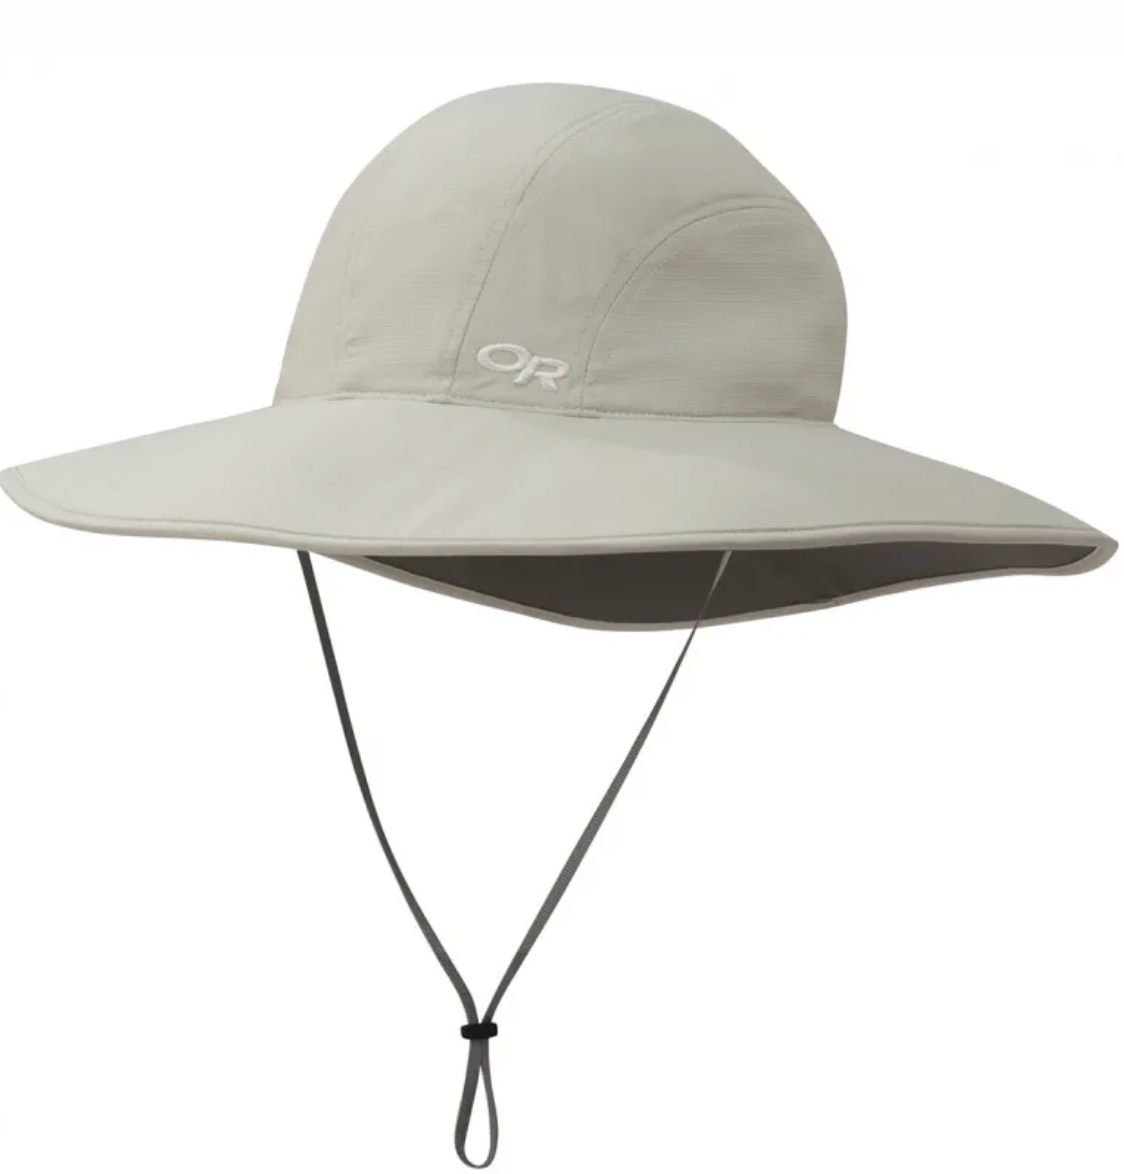 OUTDOOR RESEARCH Women's Oasis Sun Hat Sand